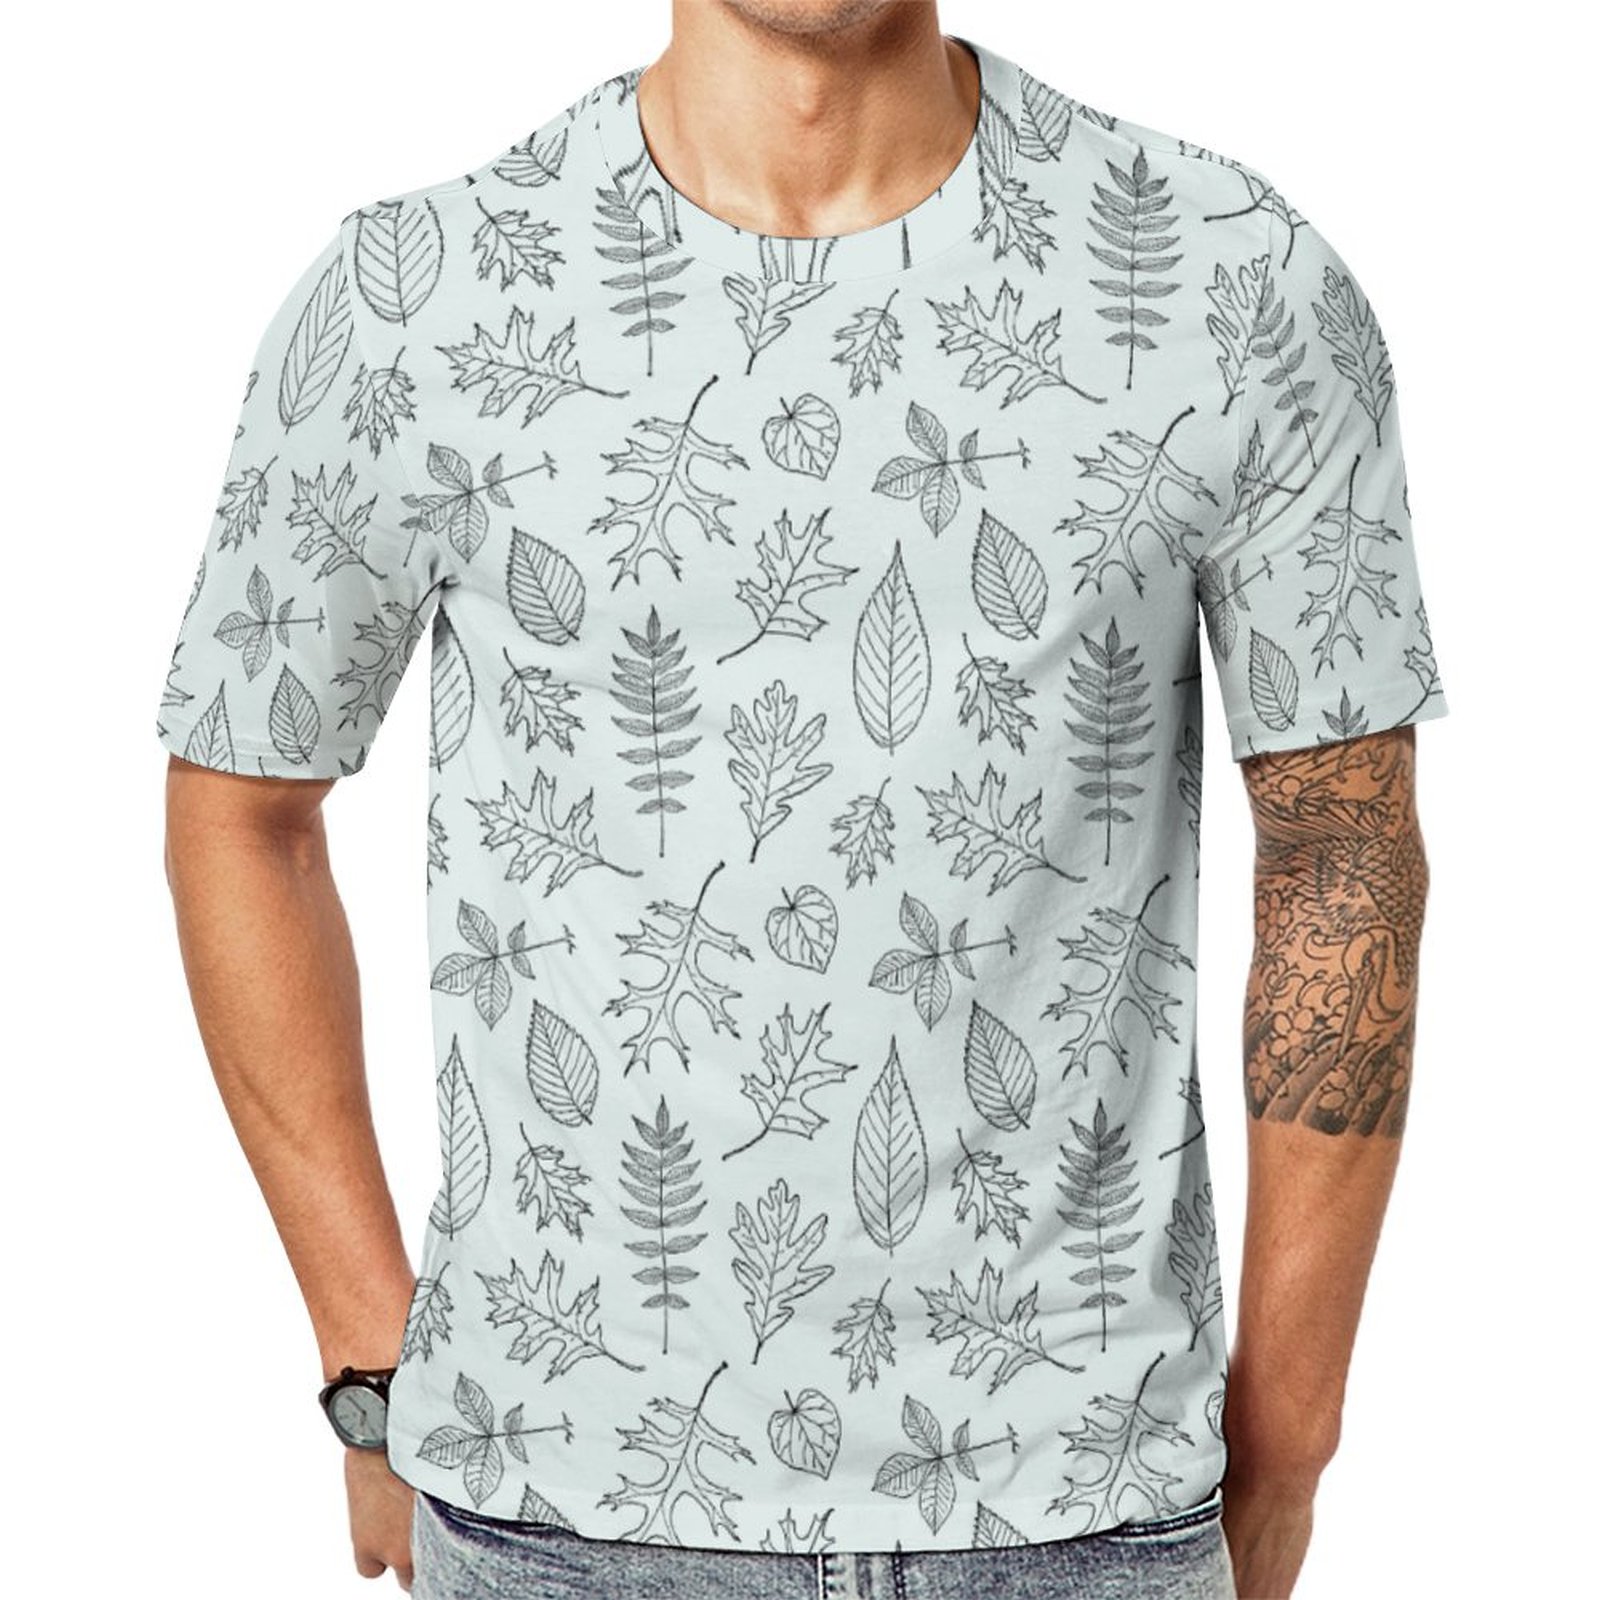 Illustrated Leaves Leaf Short Sleeve Print Unisex Tshirt Summer Casual Tees for Men and Women Coolcoshirts